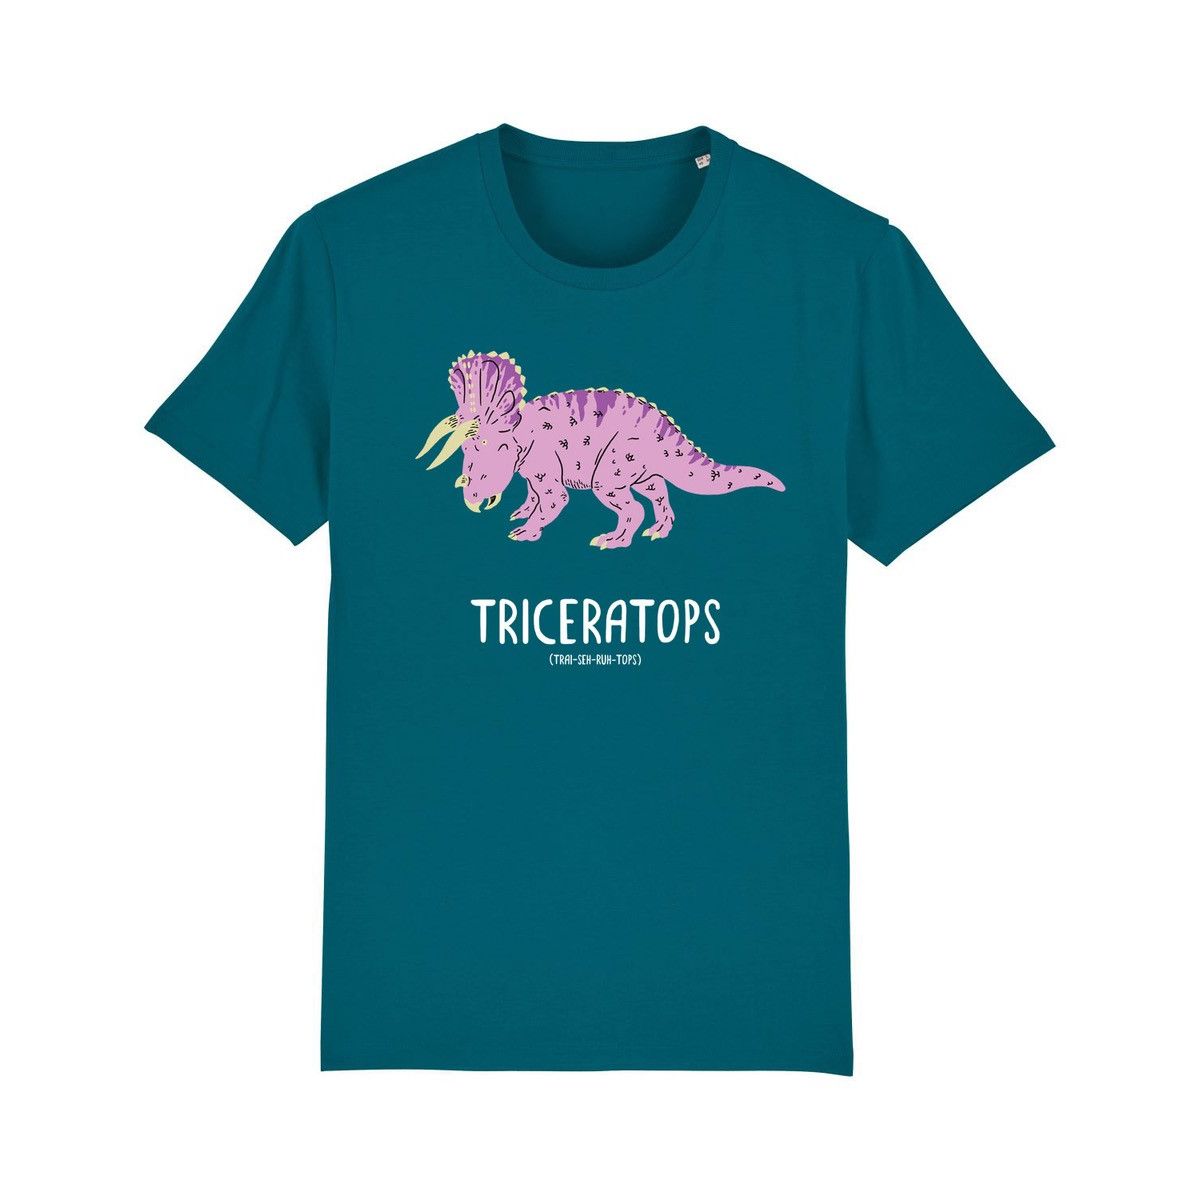 Teal shirt with a pink illustrated triceratops printed on the chest. Underneath the dinosaur the name and pronunciation are written in white.